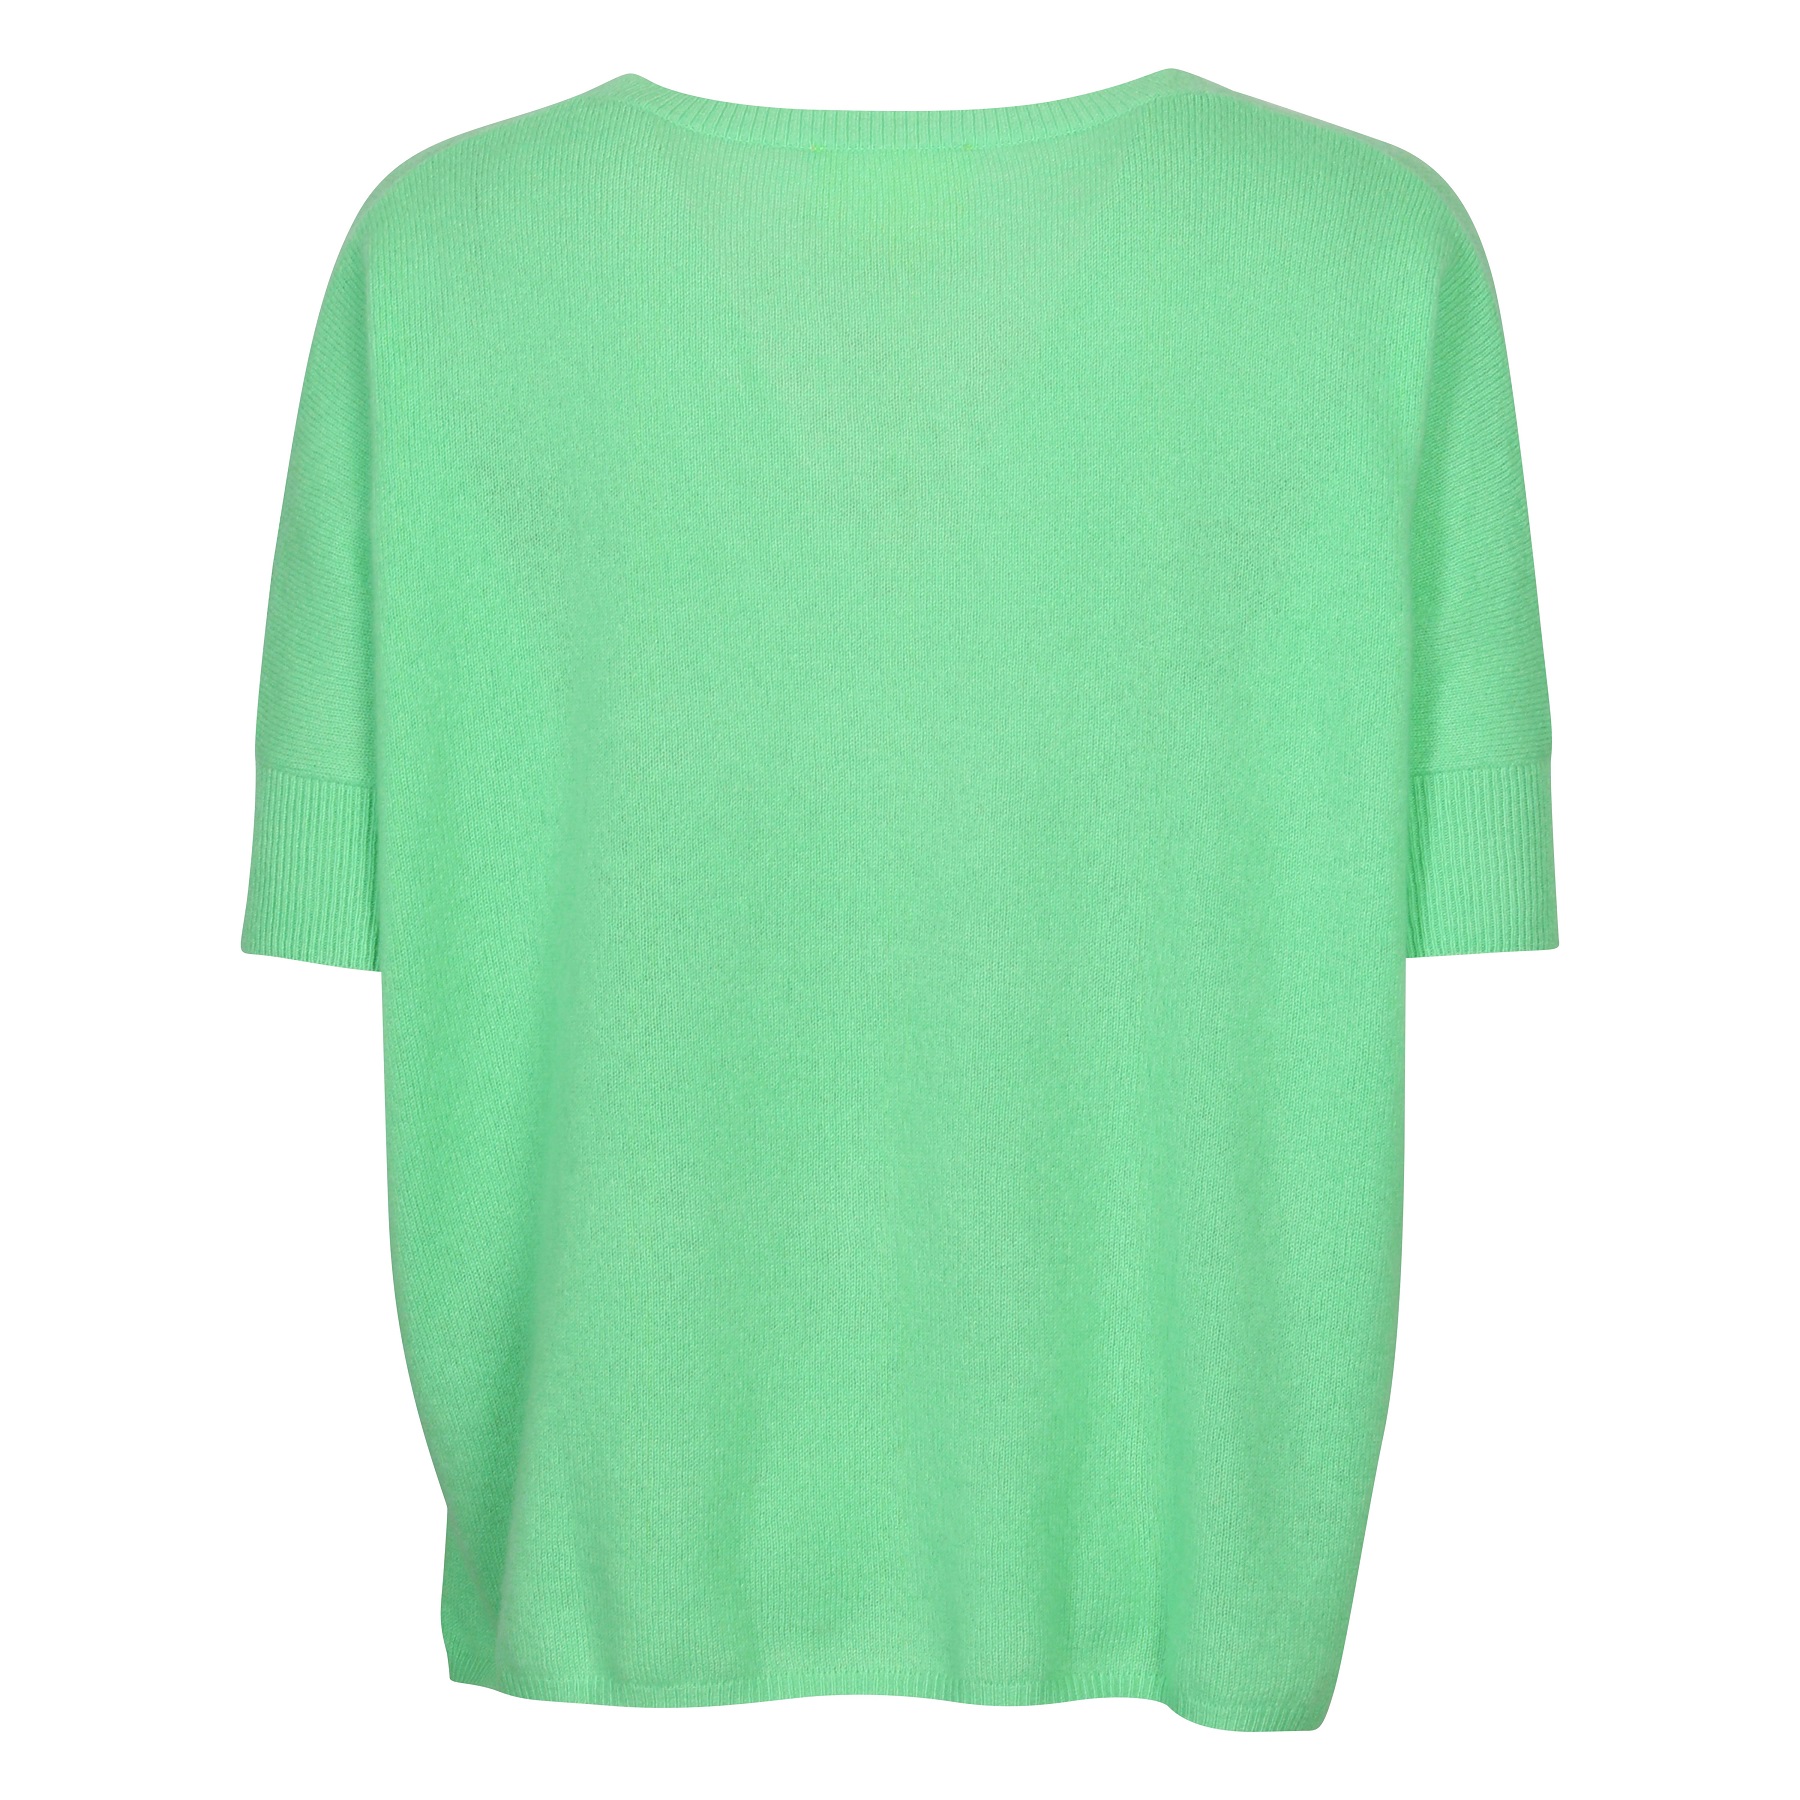 Absolut Cashmere Poncho Kate in Light Green L